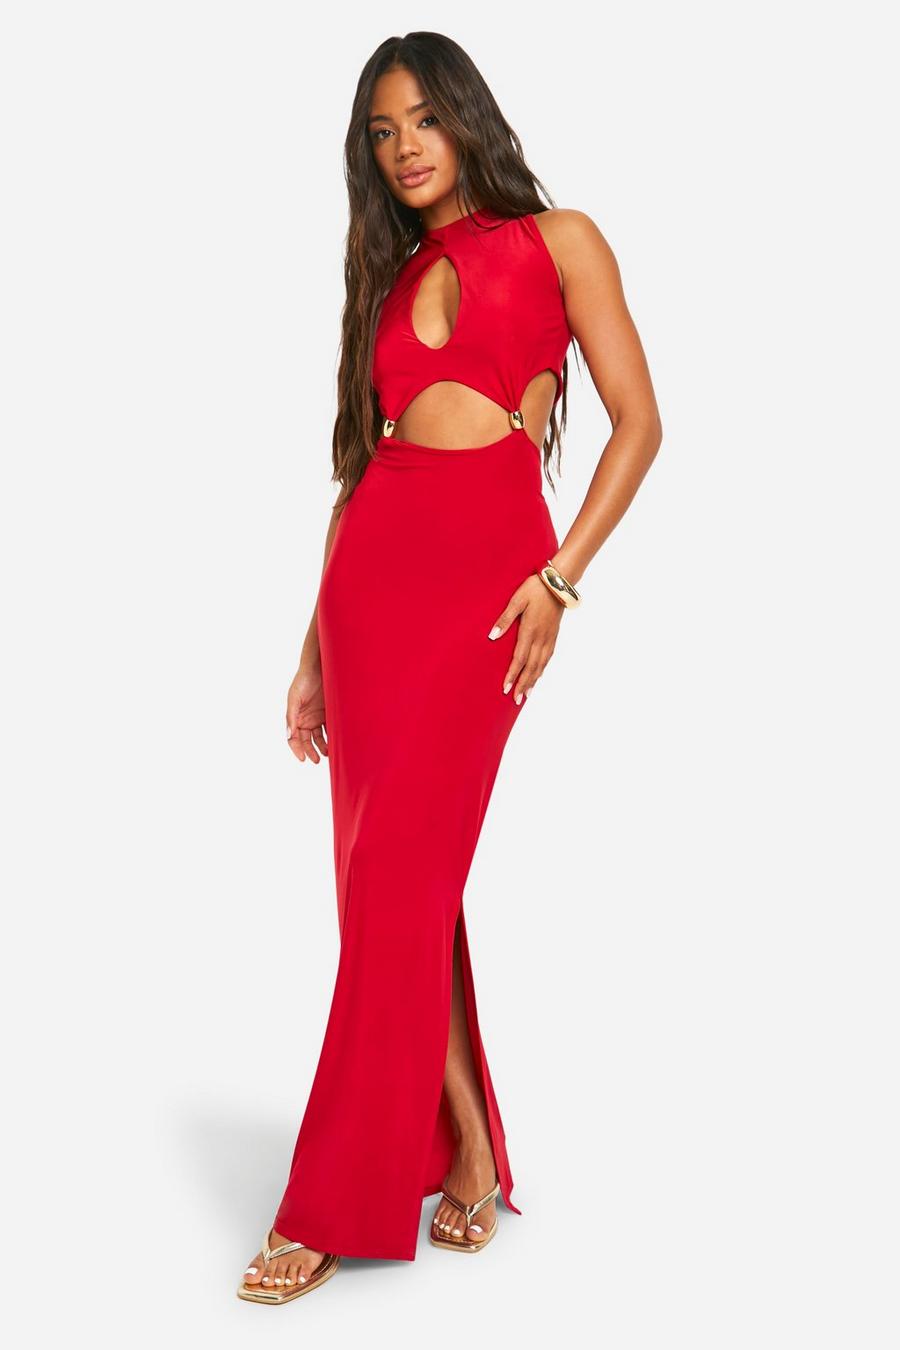 Red Halter Cut Out Beaded Maxi Dress